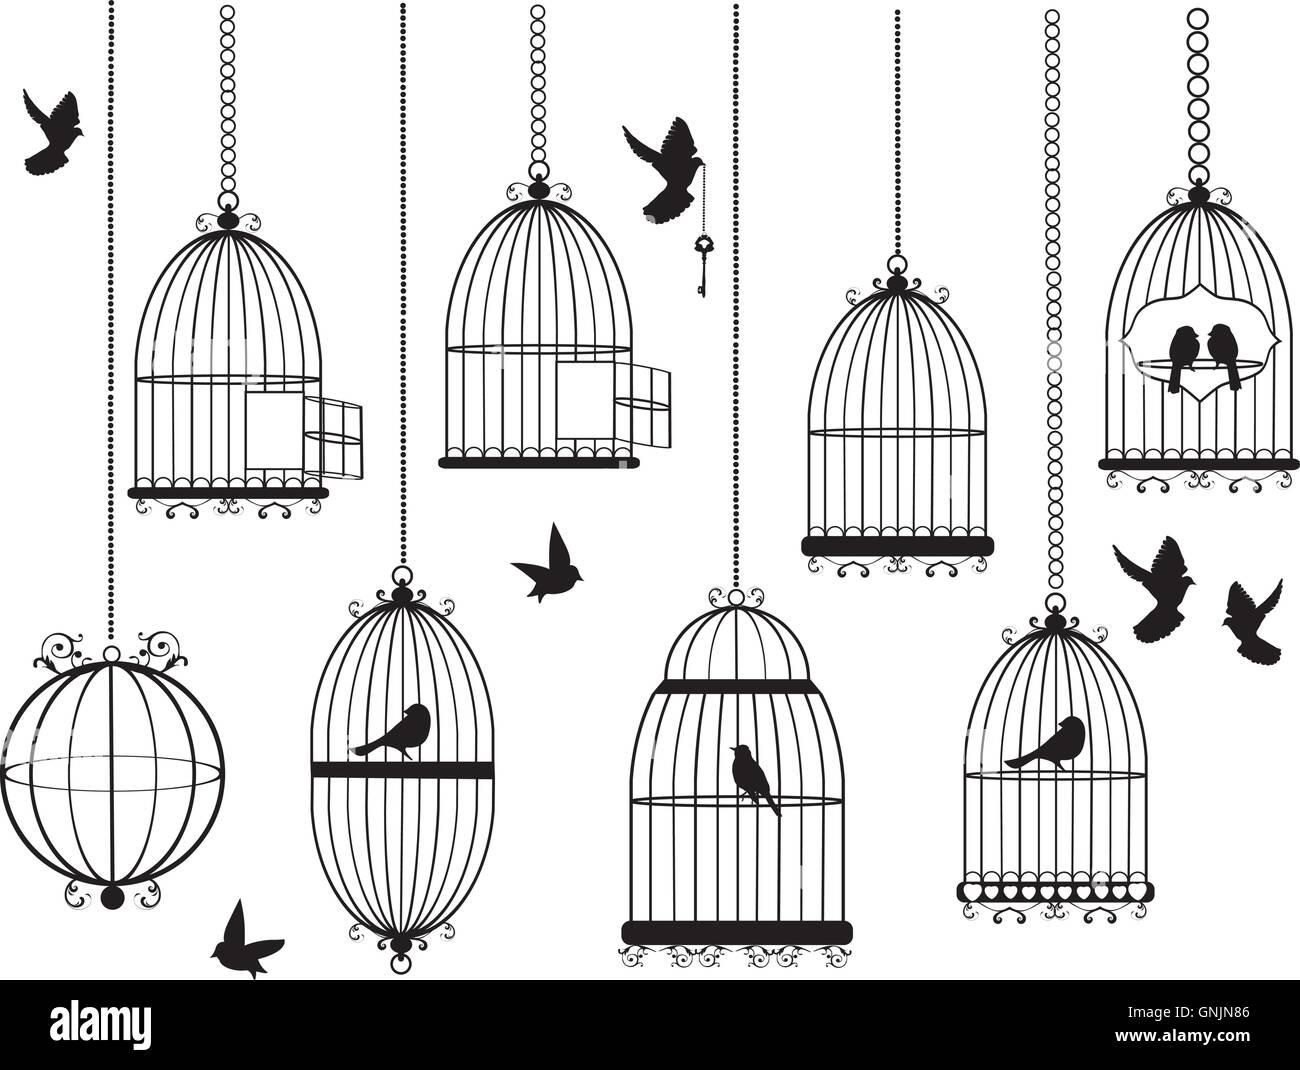 Bird cage illustration Black and White Stock Photos & Images - Alamy